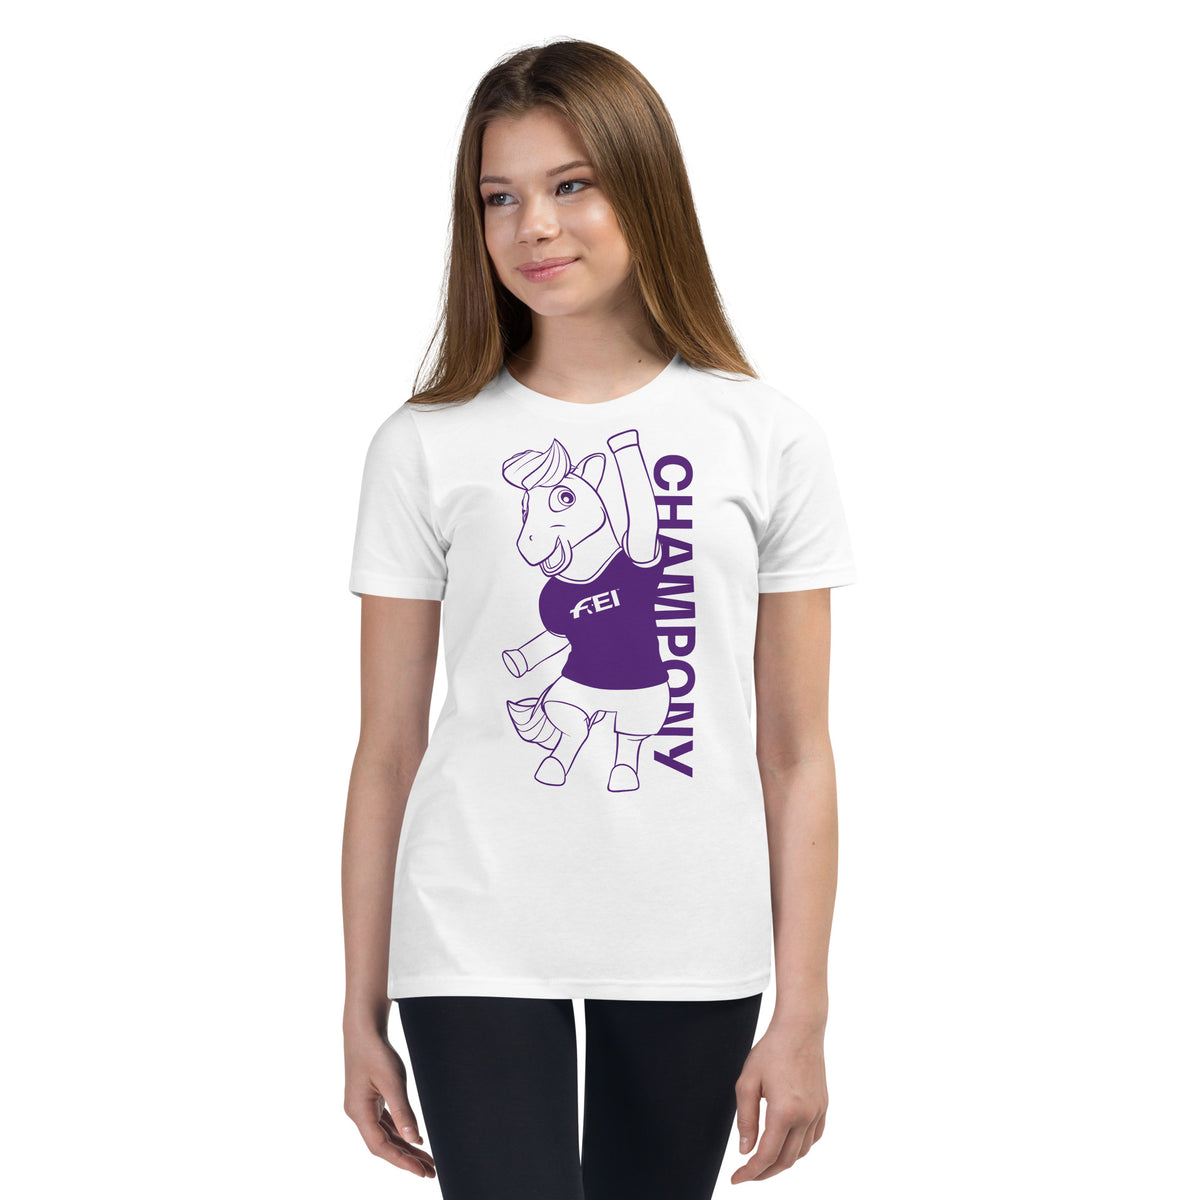 FEI Champony Mono Youth T-shirt FEI Official Store